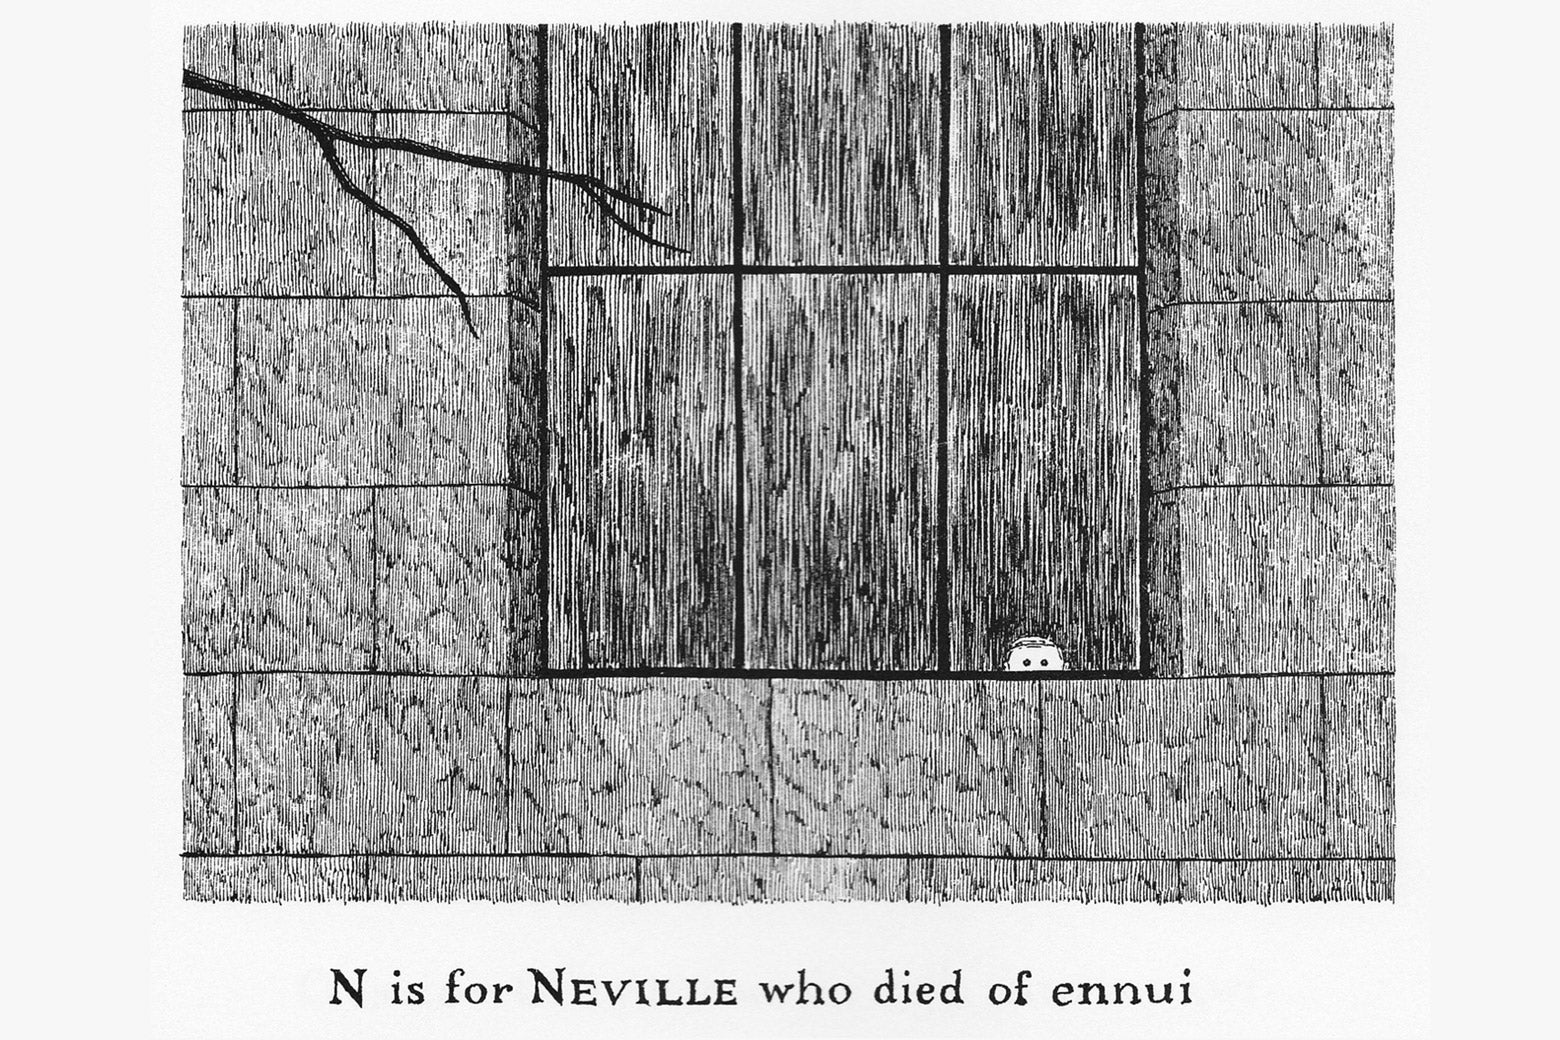 "N is for Neville who died of ennui" panel from The Gashlycrumb Tinies.